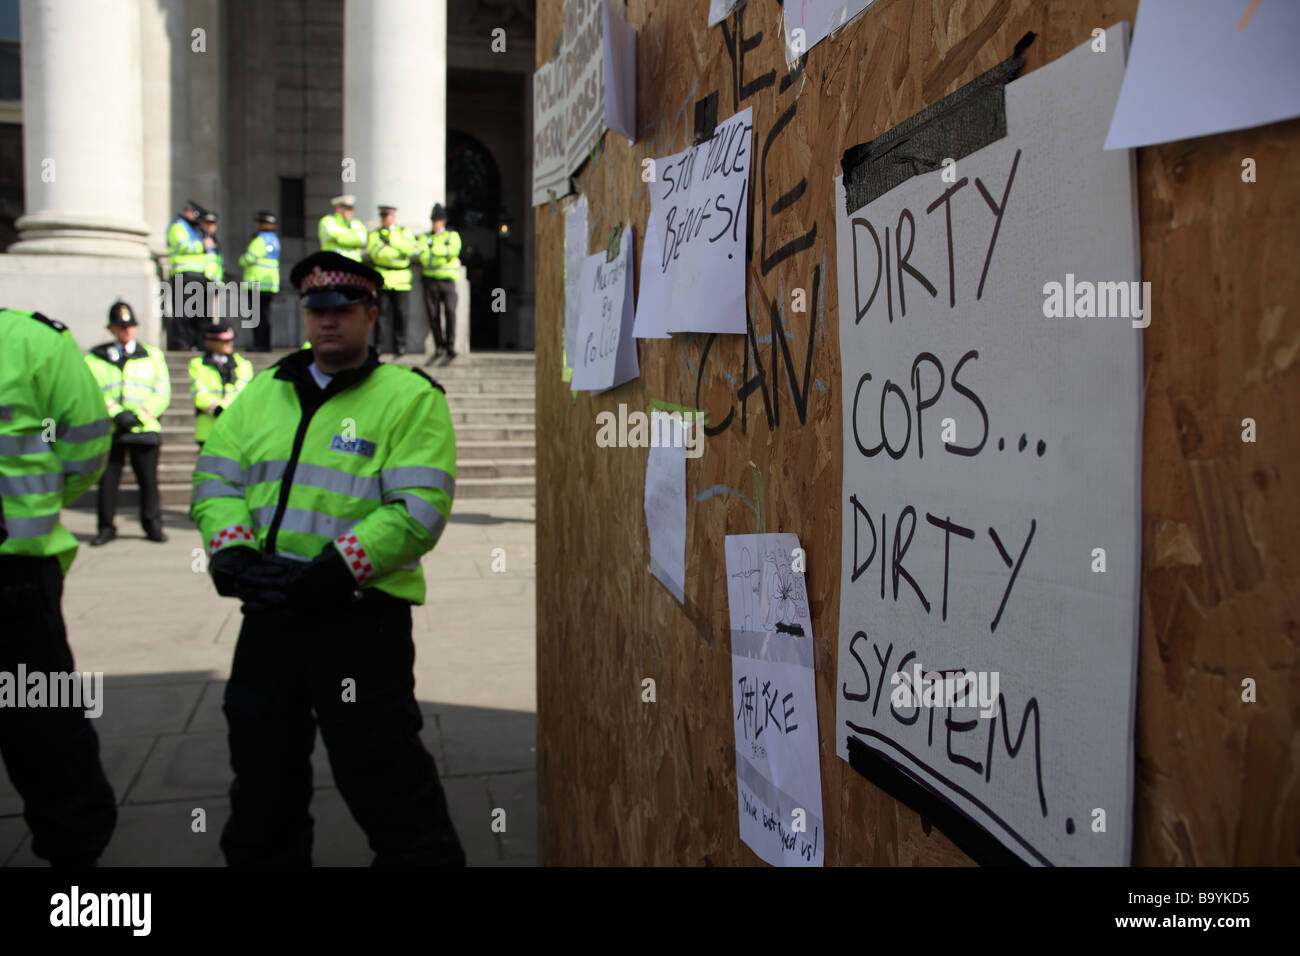 Anti-police protest messages posted on a board outside the Bank of England during the 2009 G20 summit, London, UK. Stock Photo